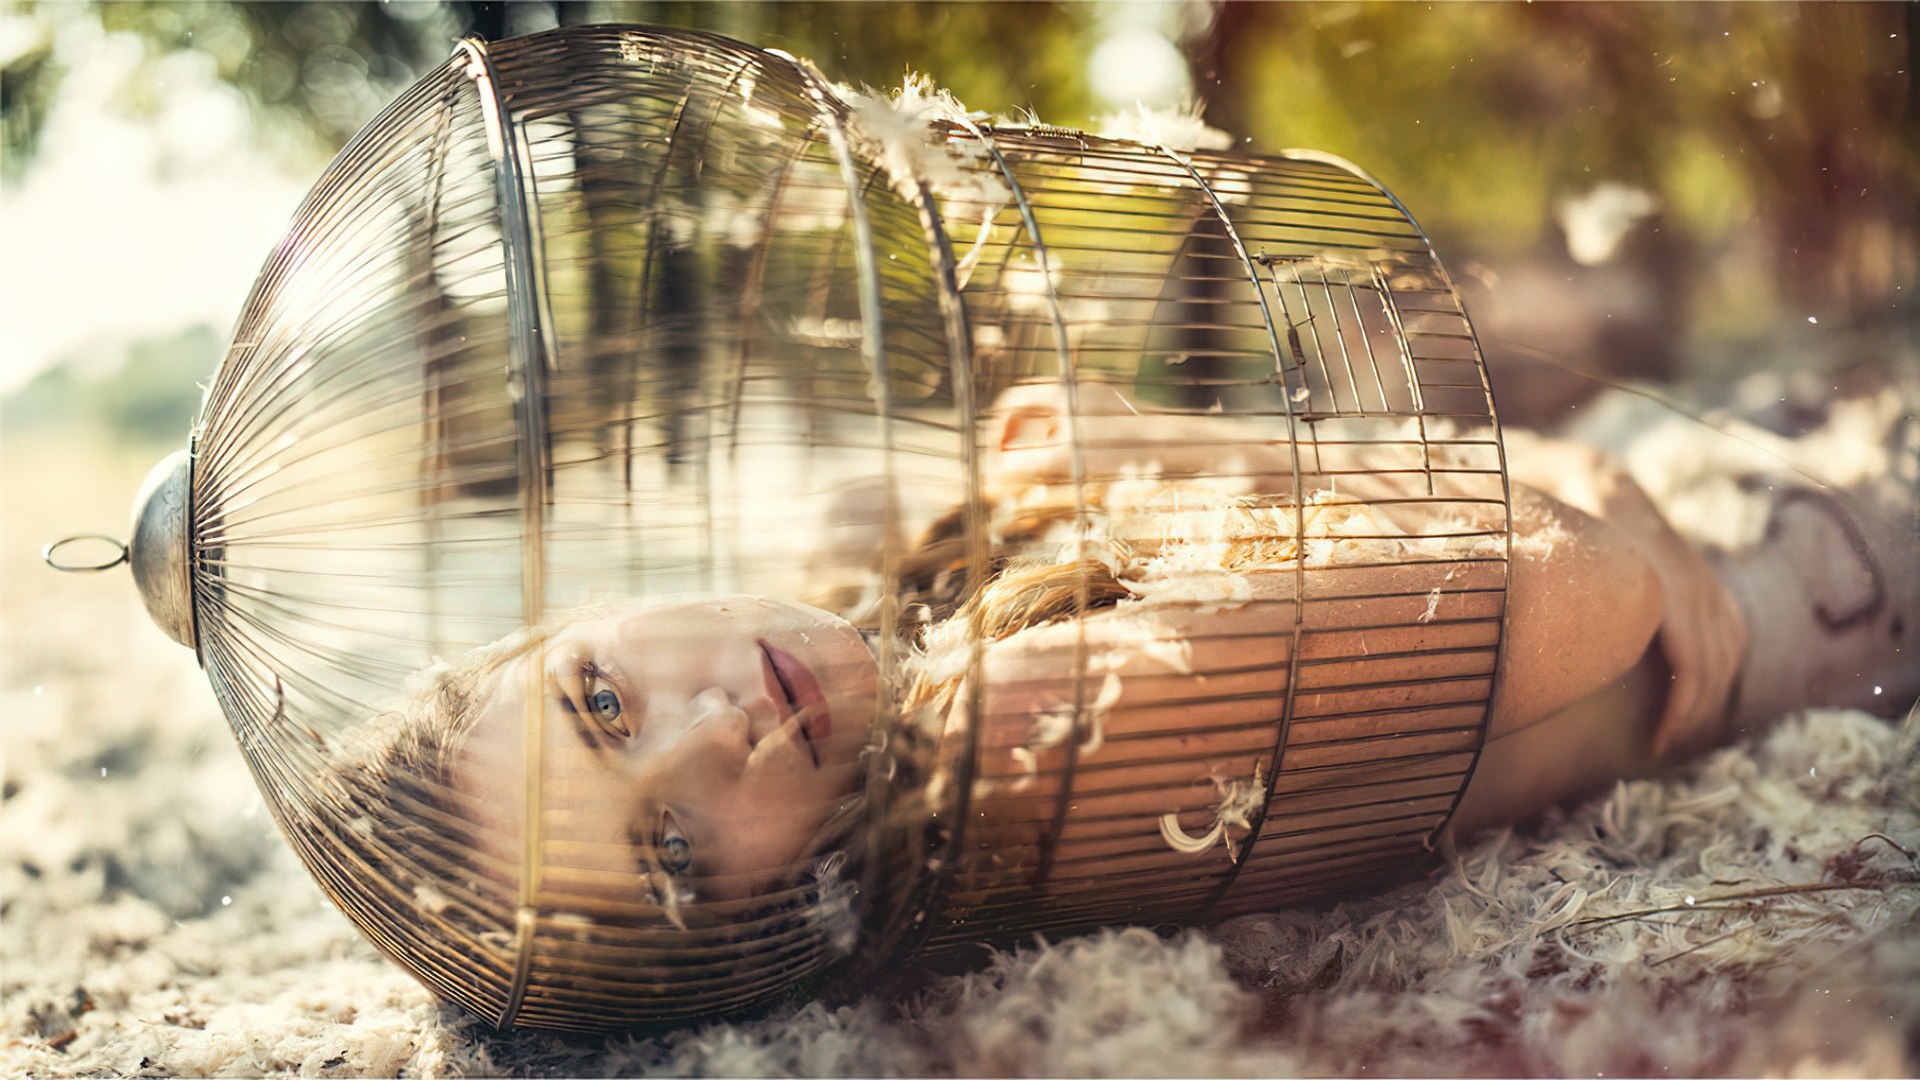 women, model, blonde, blue eyes, cage, feather, outdoor Full HD